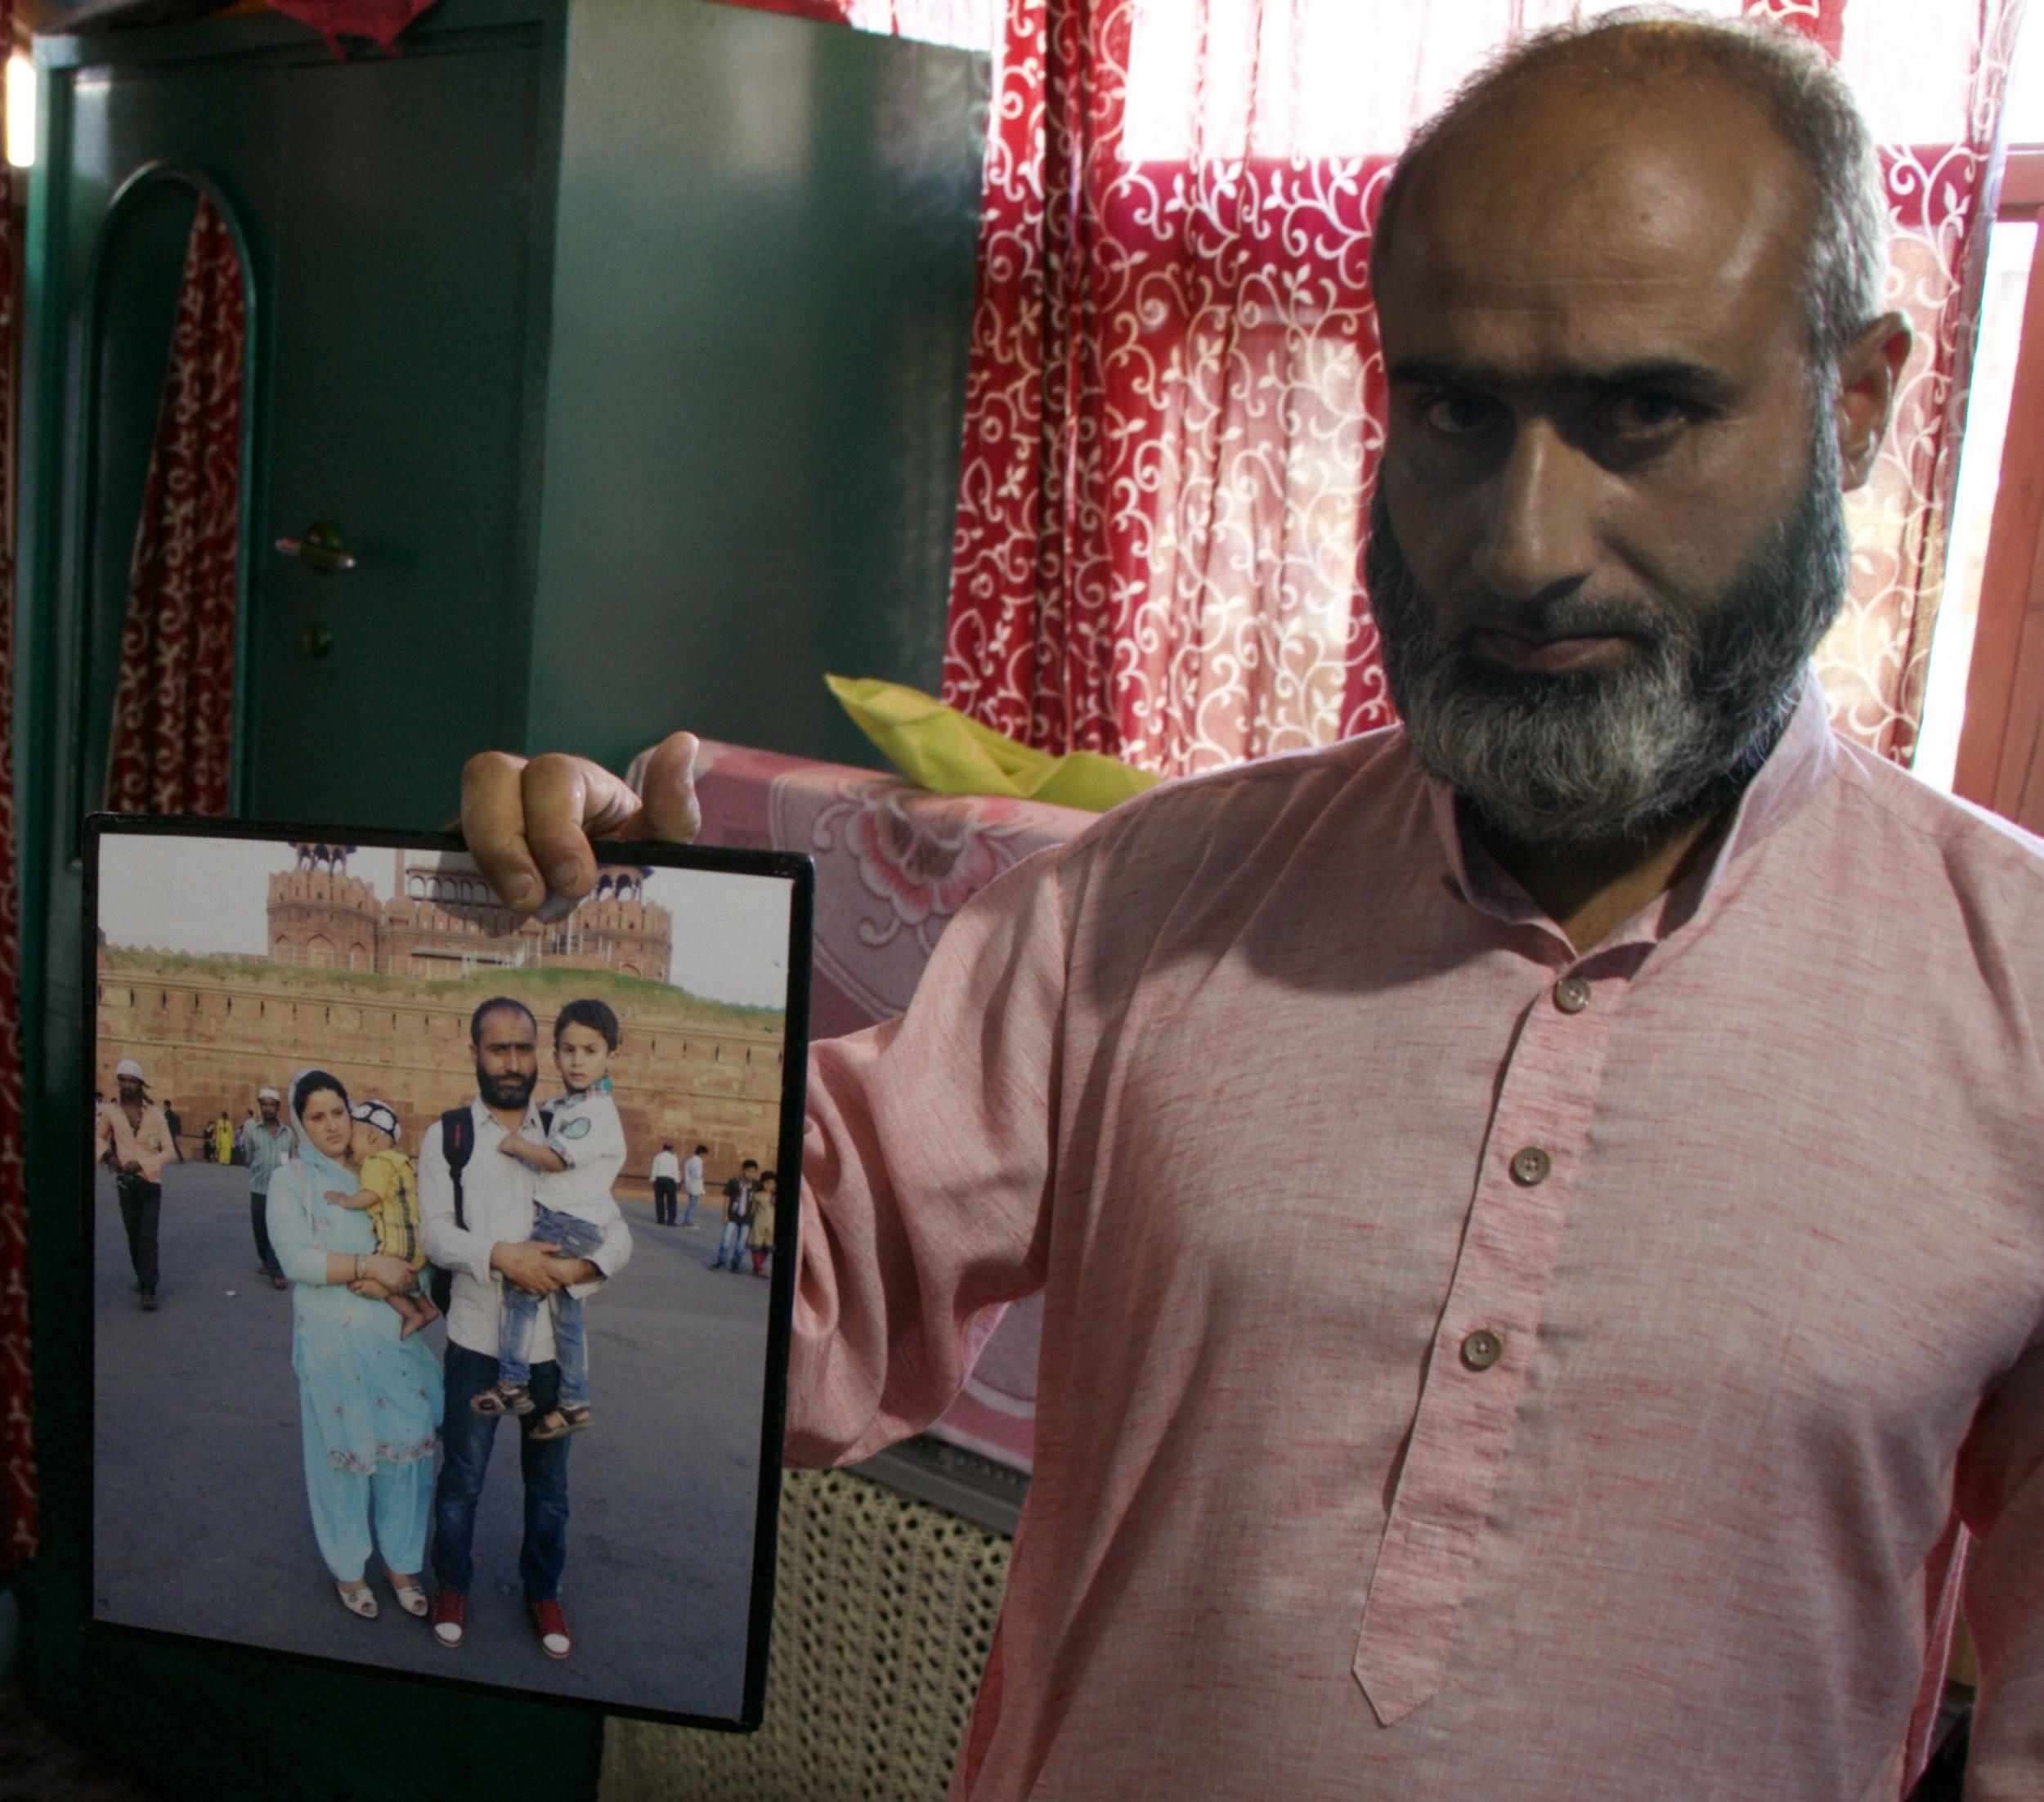 Rafiq Shagoo holds a family photograph of his wife Fehmeeda Bano, 35, and their two sons. Fehmeeda died after inhaling tear gas during clashes